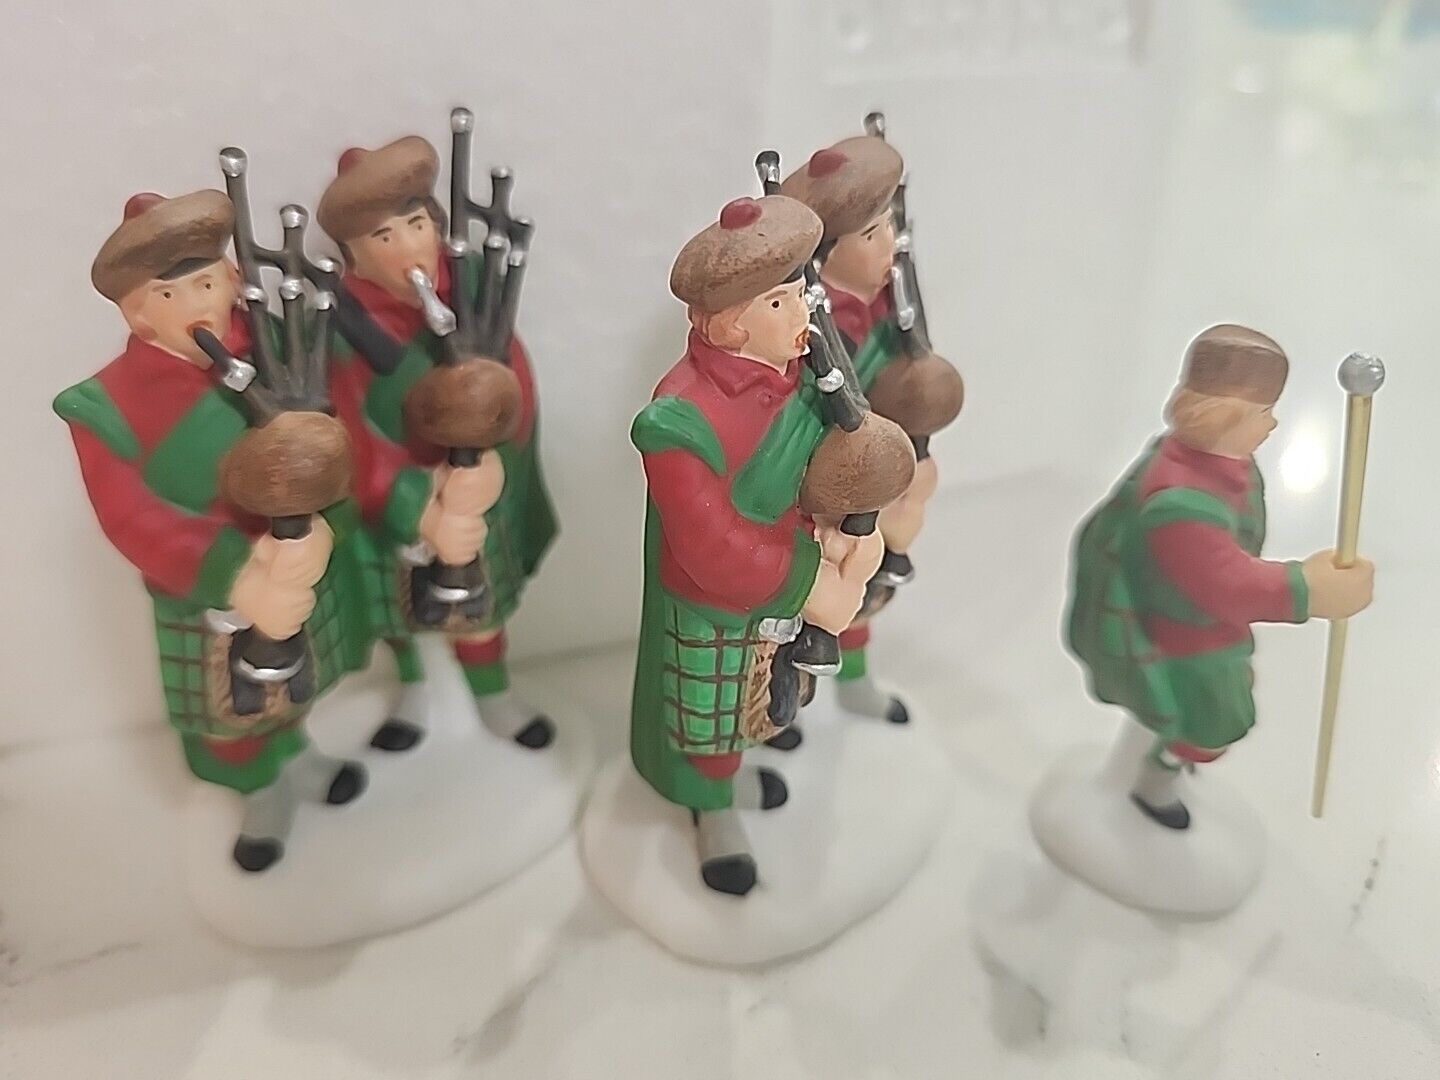 Dept 56 Heritage Village  -12 days of Dickens-”Ten Pipers Piping” 